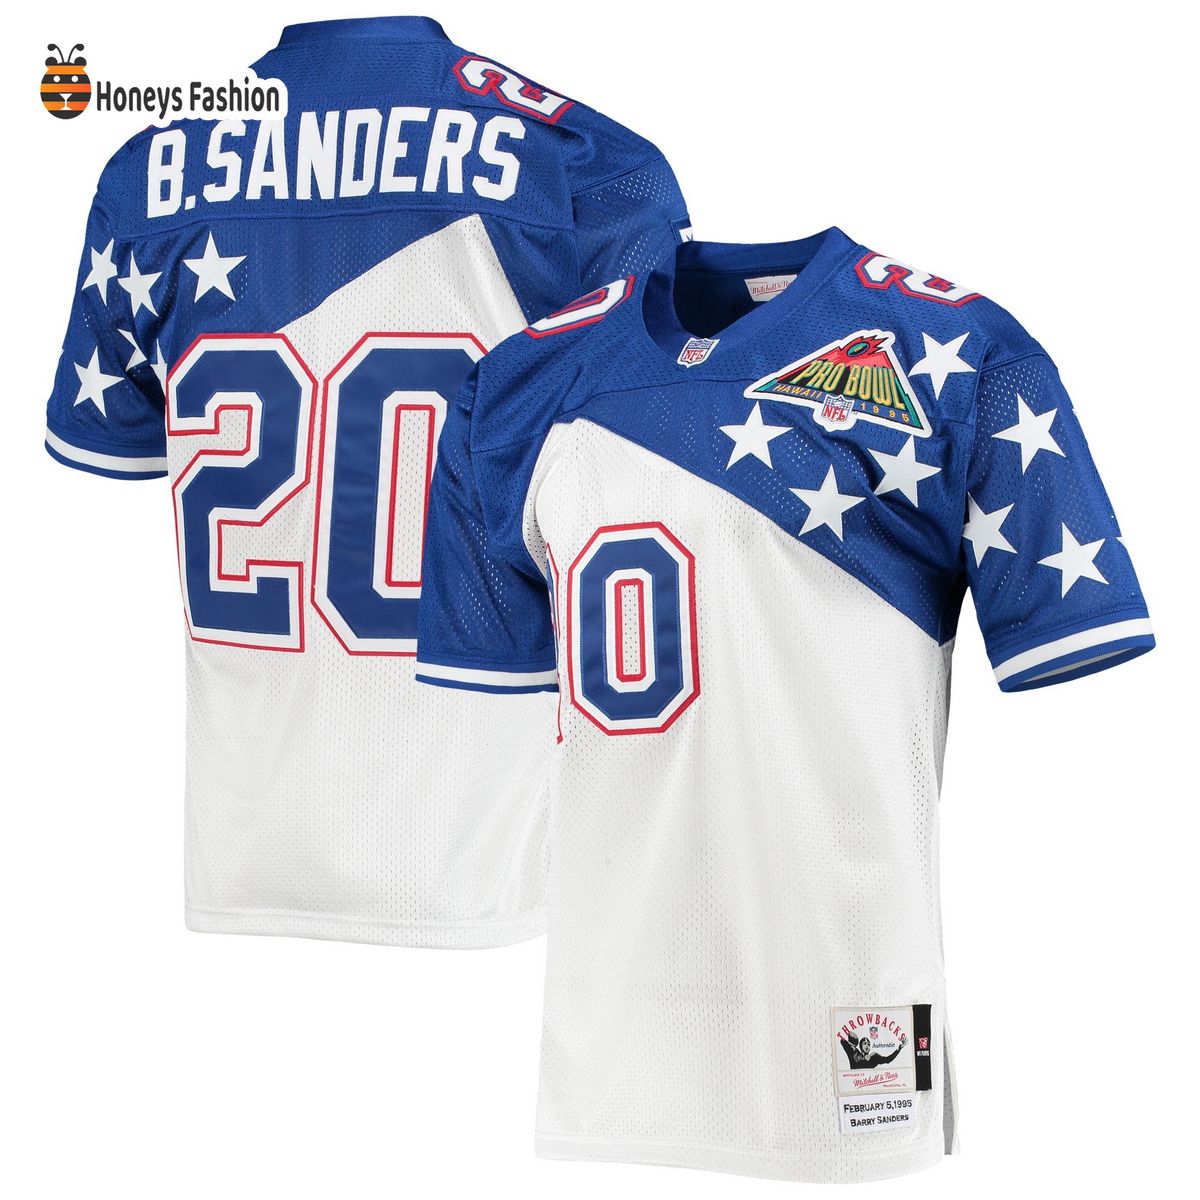 Barry Sanders NFC Mitchell & Ness 1994 Pro Bowl Authentic White/Blue Jersey